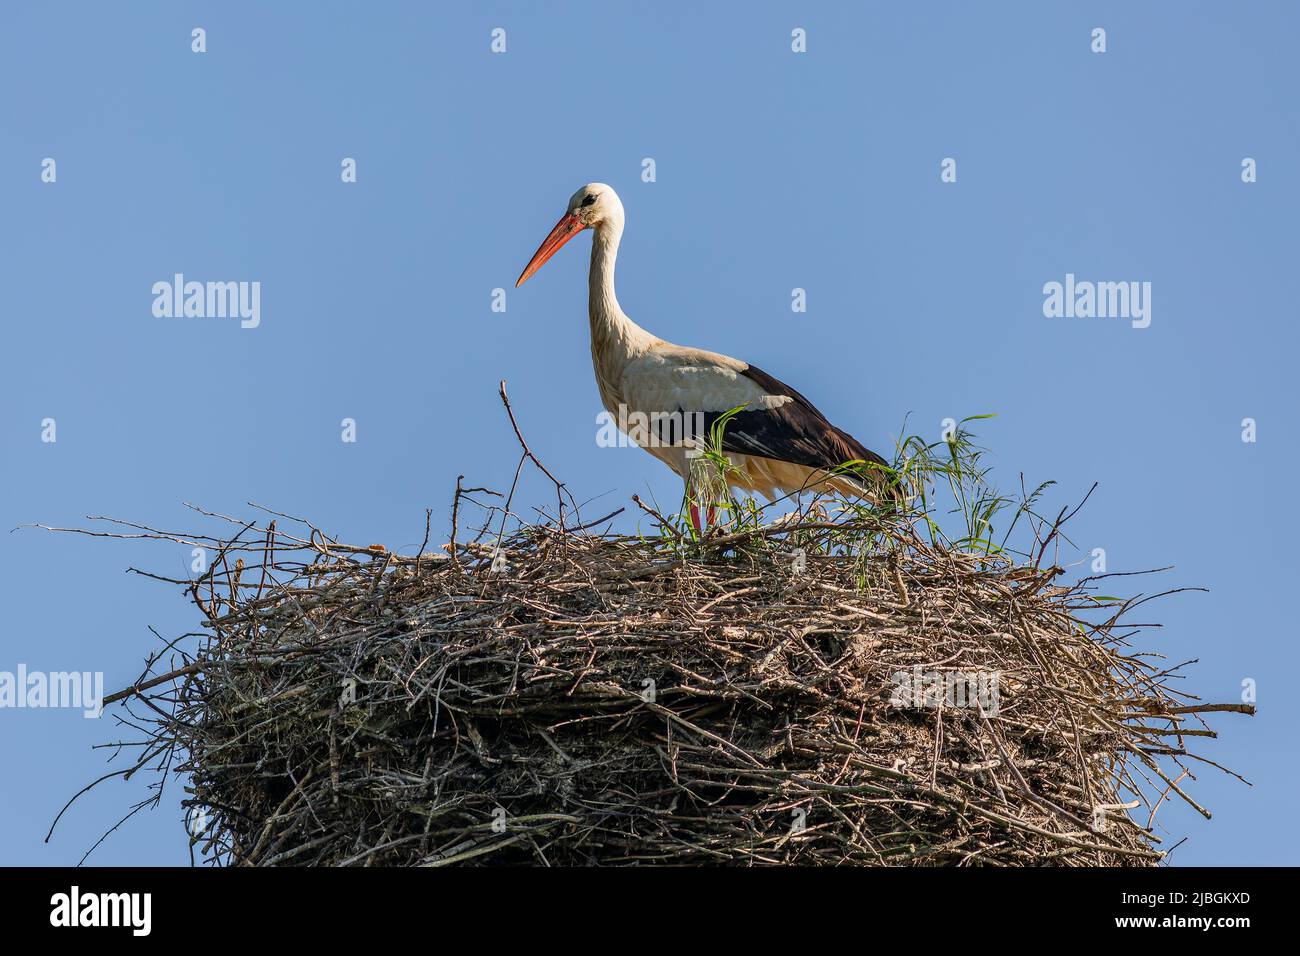 A white stork with red beak standing on its nest made of thin sticks. Sunny spring day with clear blue sky. Stock Photo